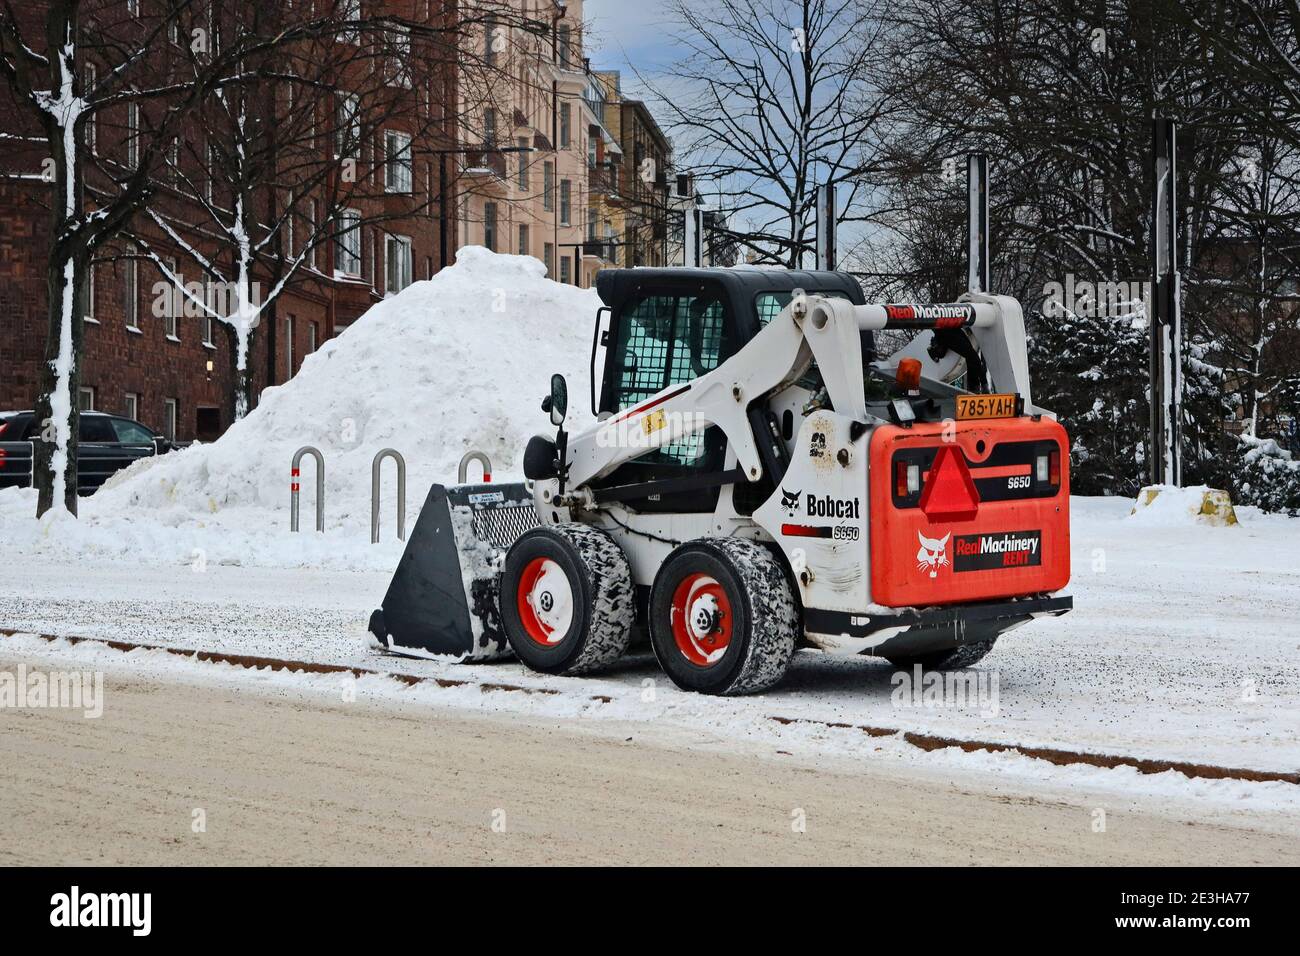 Bobcat S650 skid steer loader for removing snow in parked at the side of city street. Helsinki, Finland. January 18, 2021. Stock Photo